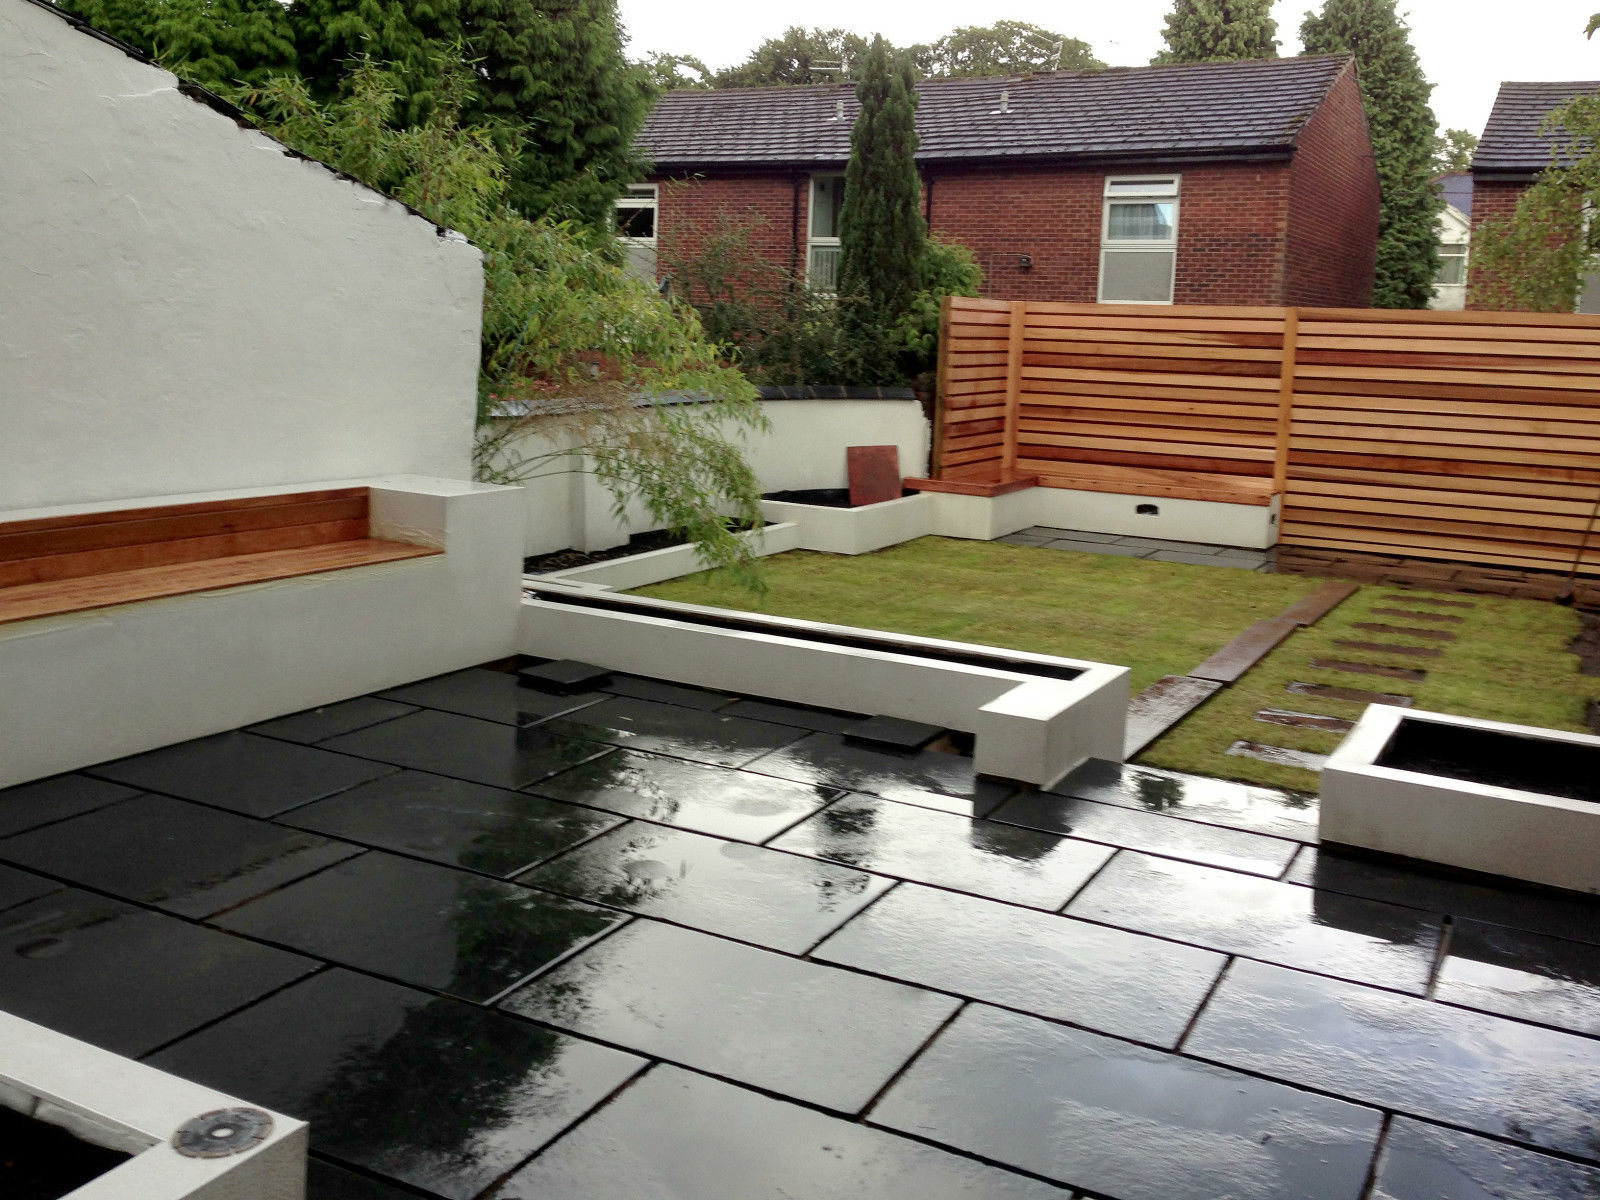 Benefits Of Using Limestone Paving Slabs In Your Residential Property